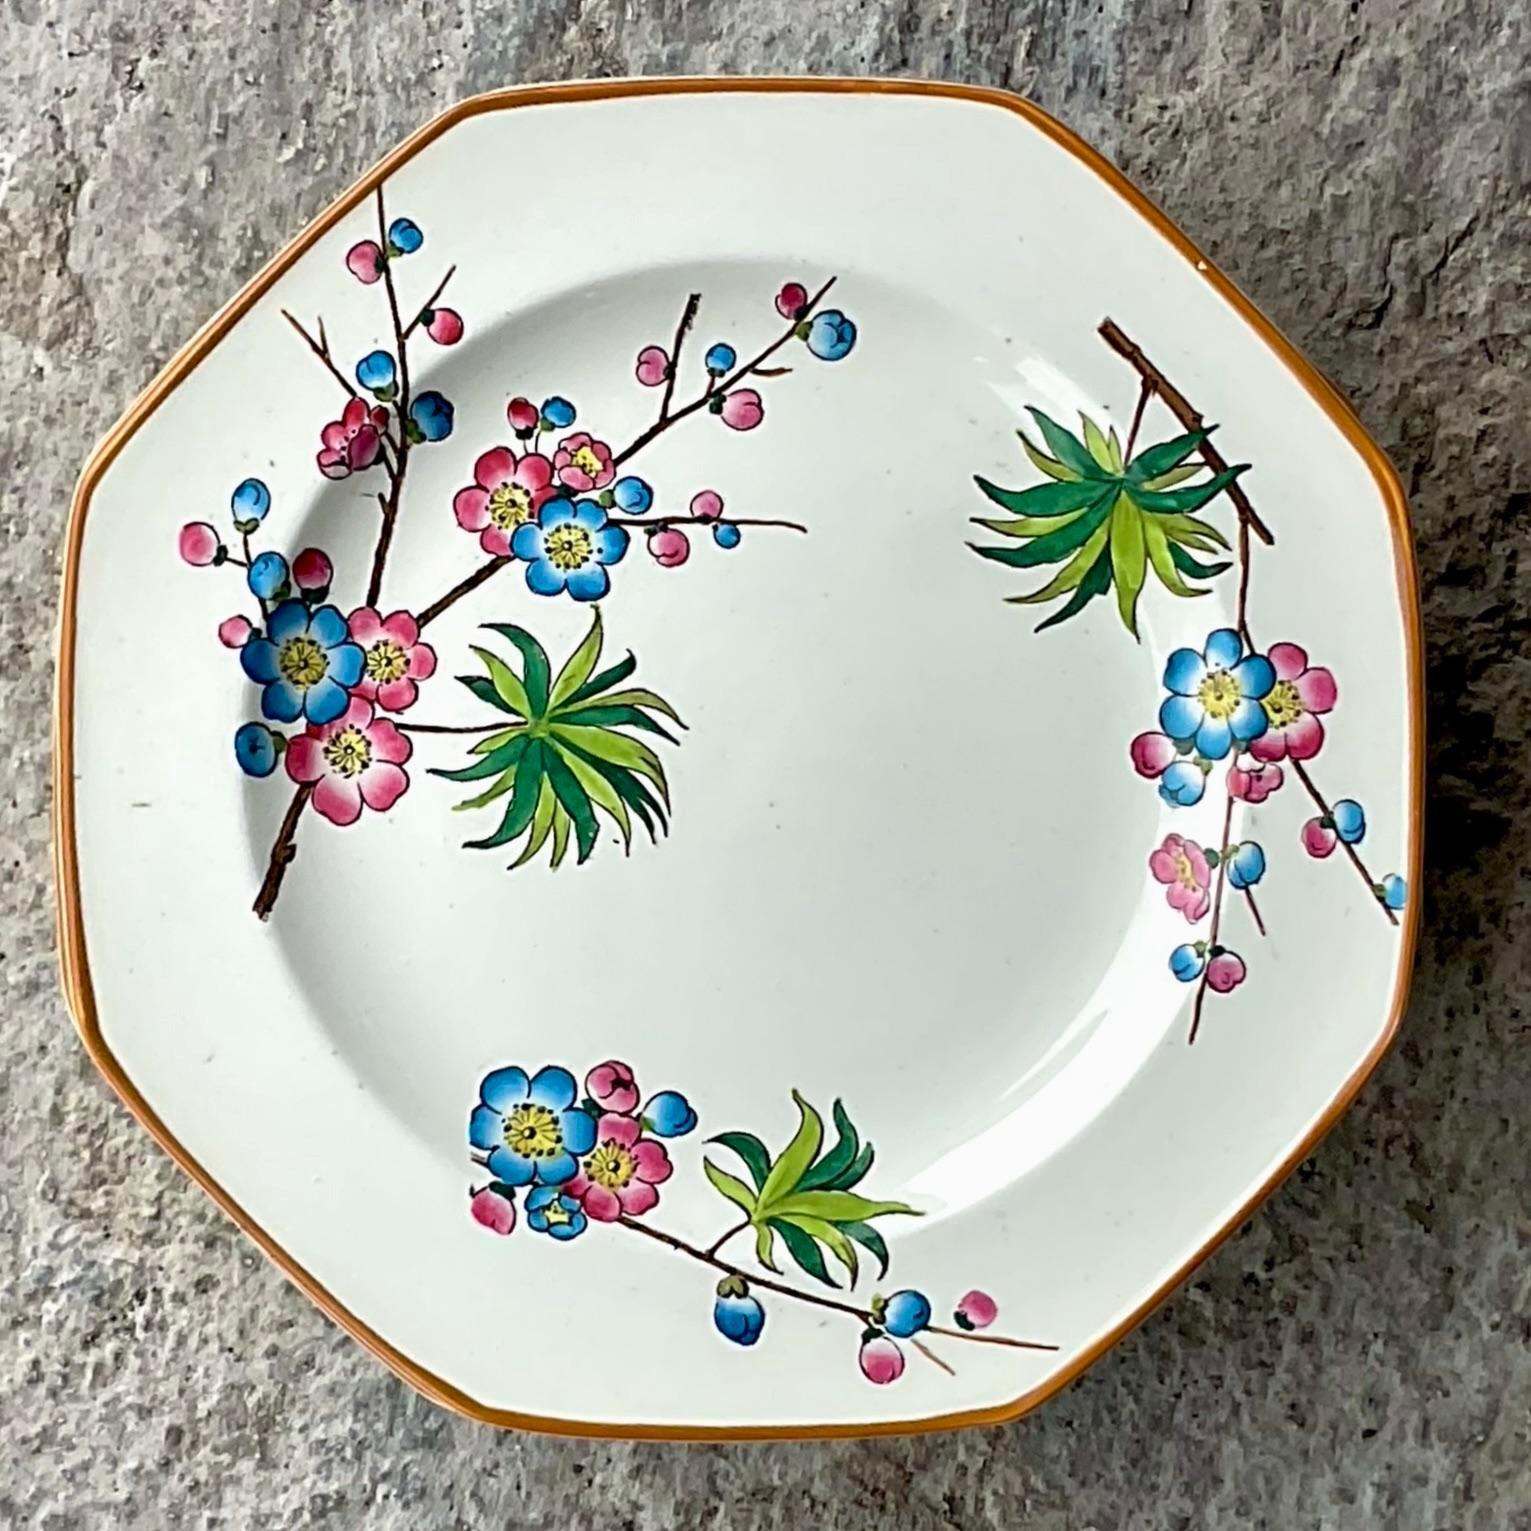 A stunning set of 8 vintage Luncheon plates. Made by the iconic Wedgwood group in England and stamped on the bottom. A brilliantly colored Spring Blossom design with charming palm trees. Acquired from a Palm Beach estate.